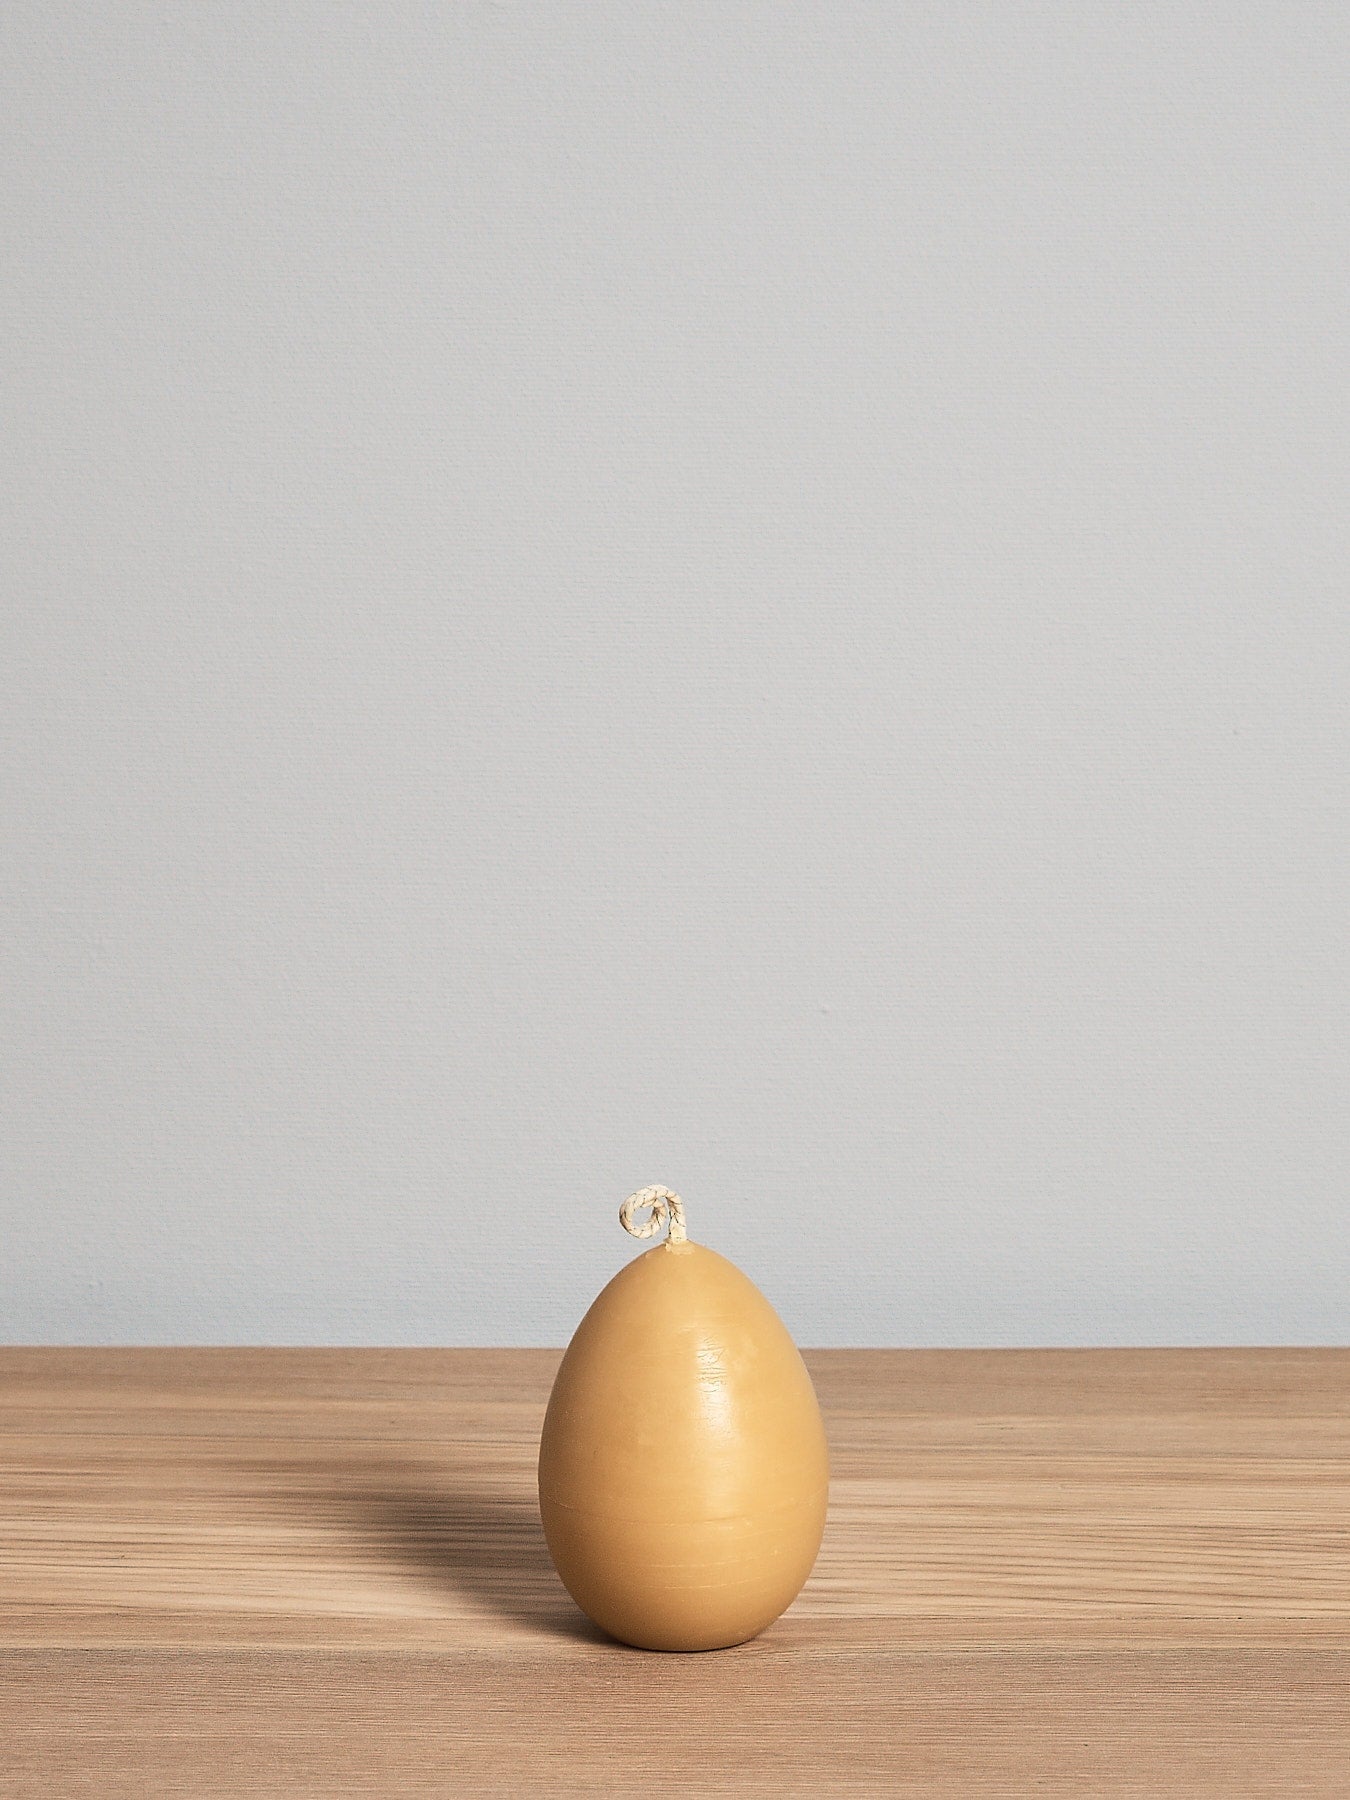 A yellow Hohepa Candles egg sitting on a wooden table.